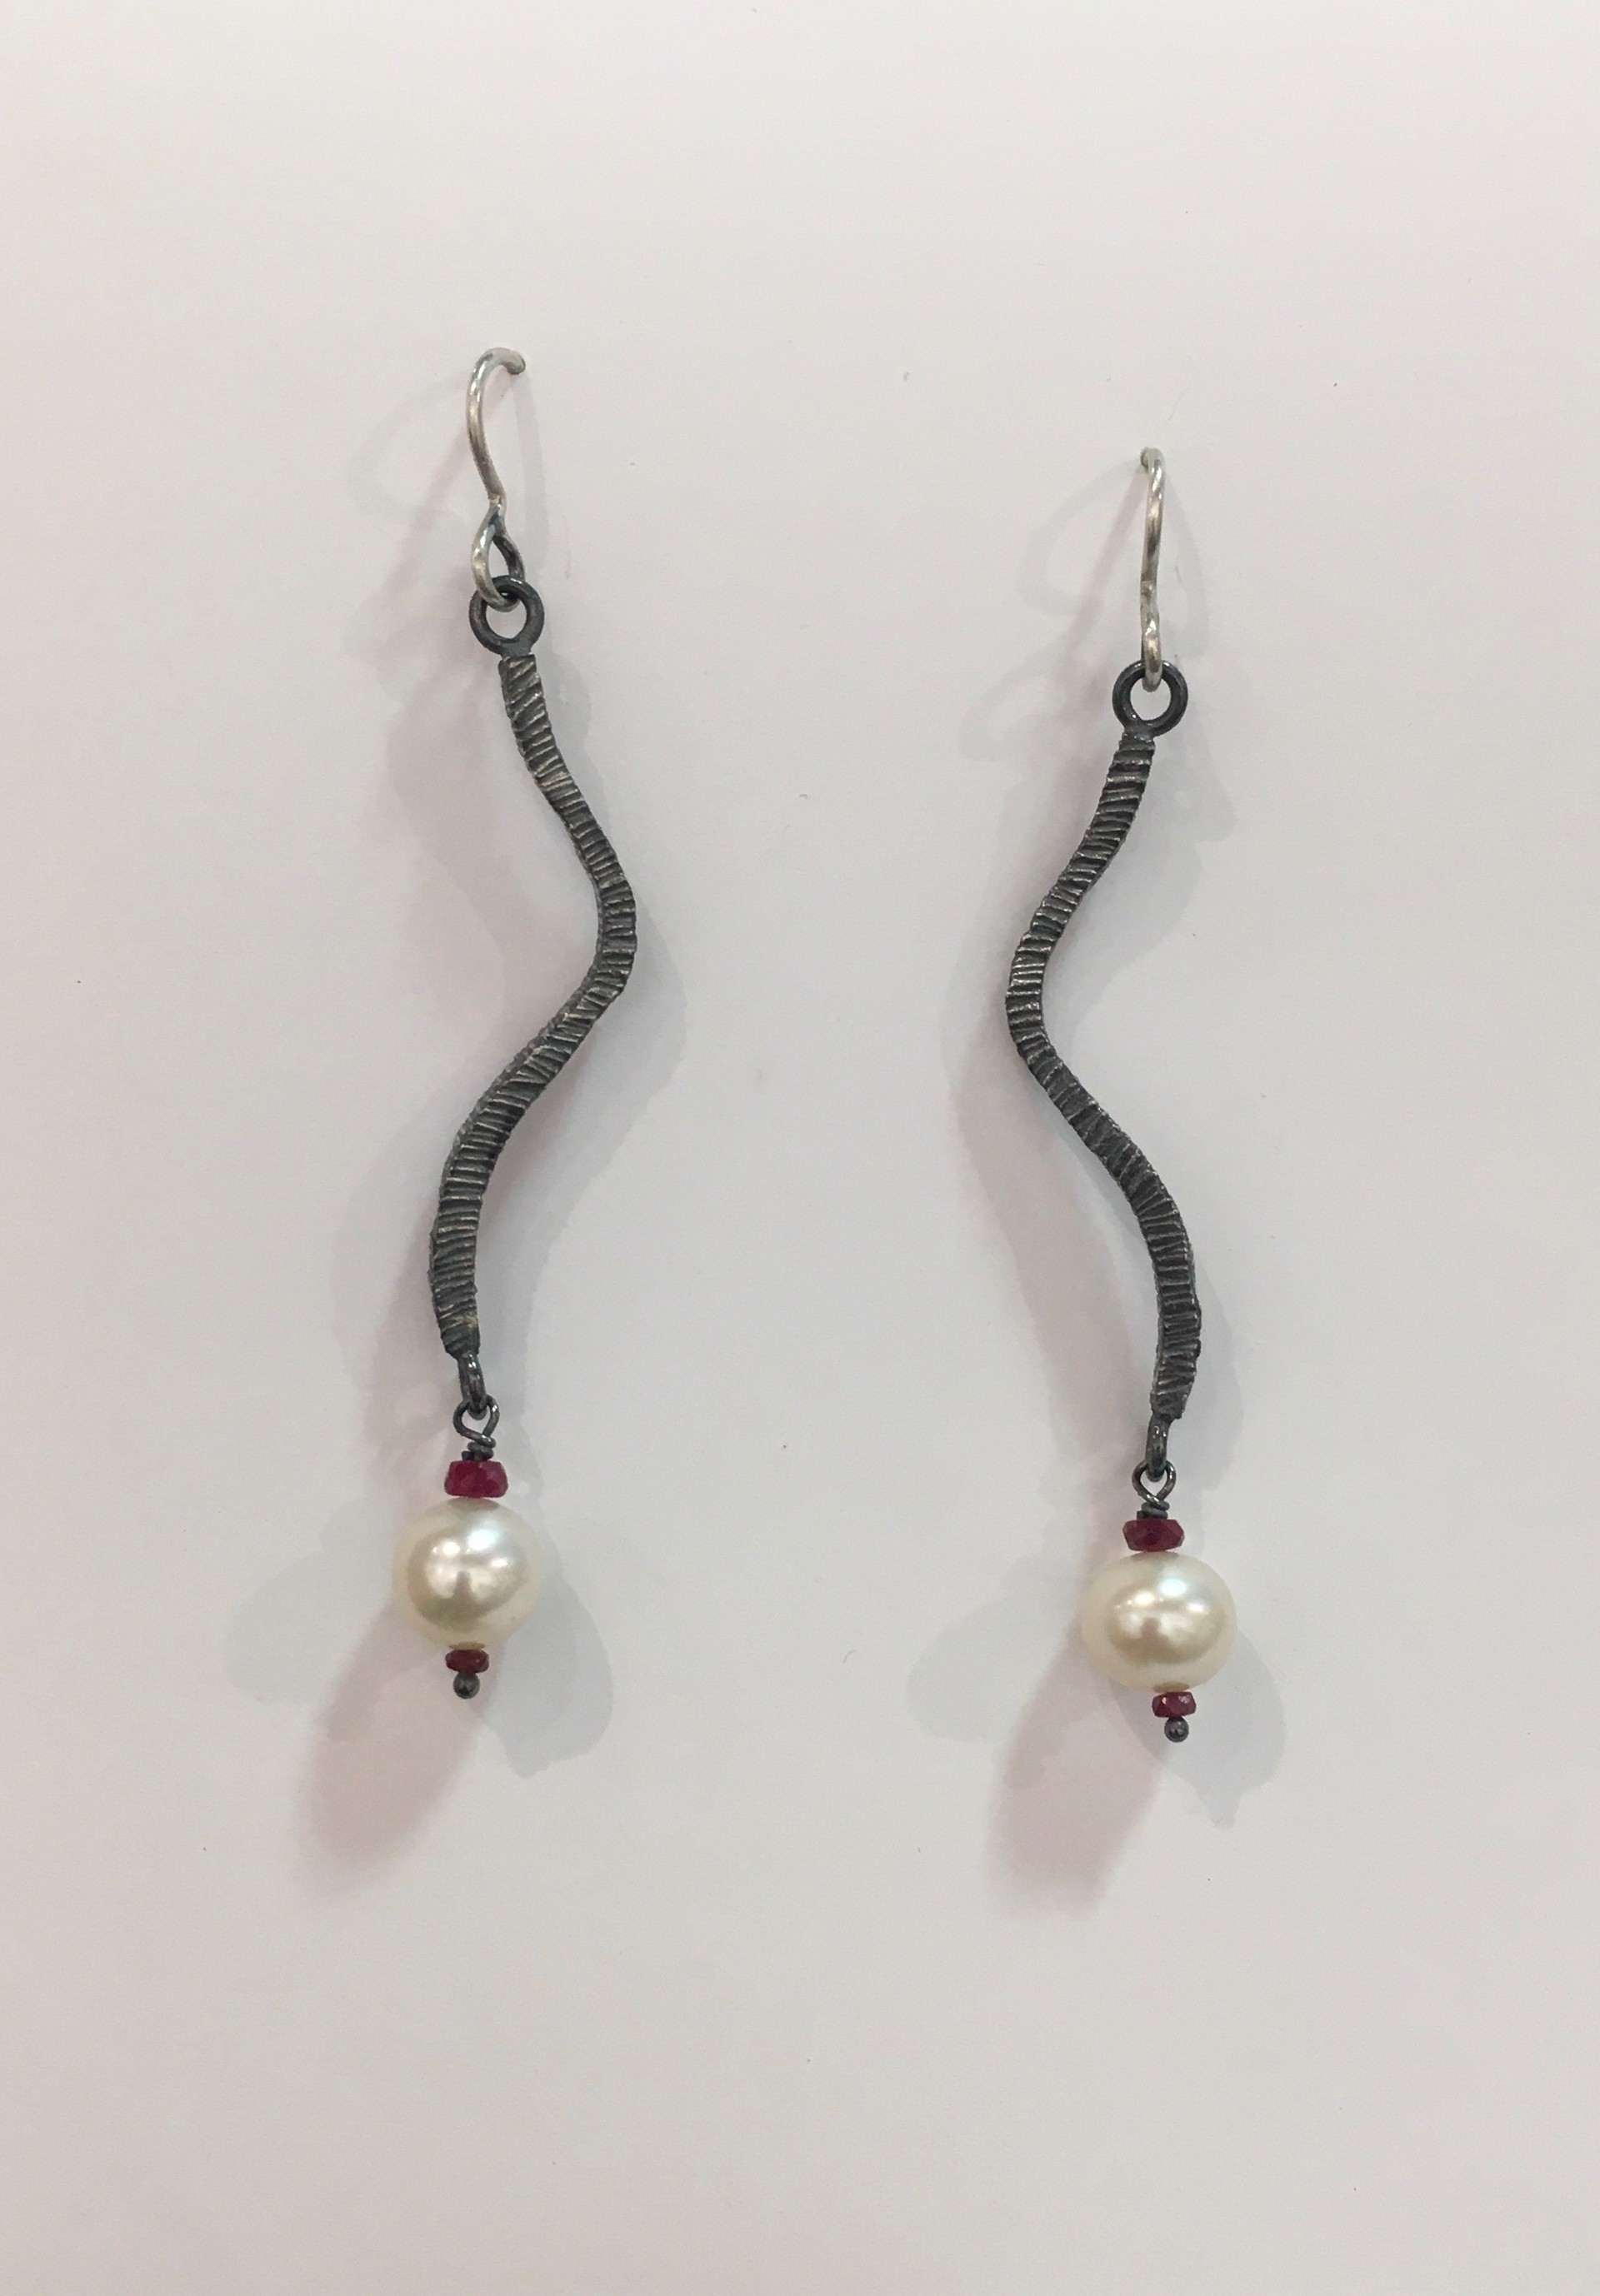 Pearl and Ruby Earrings by DAHLIA KANNER